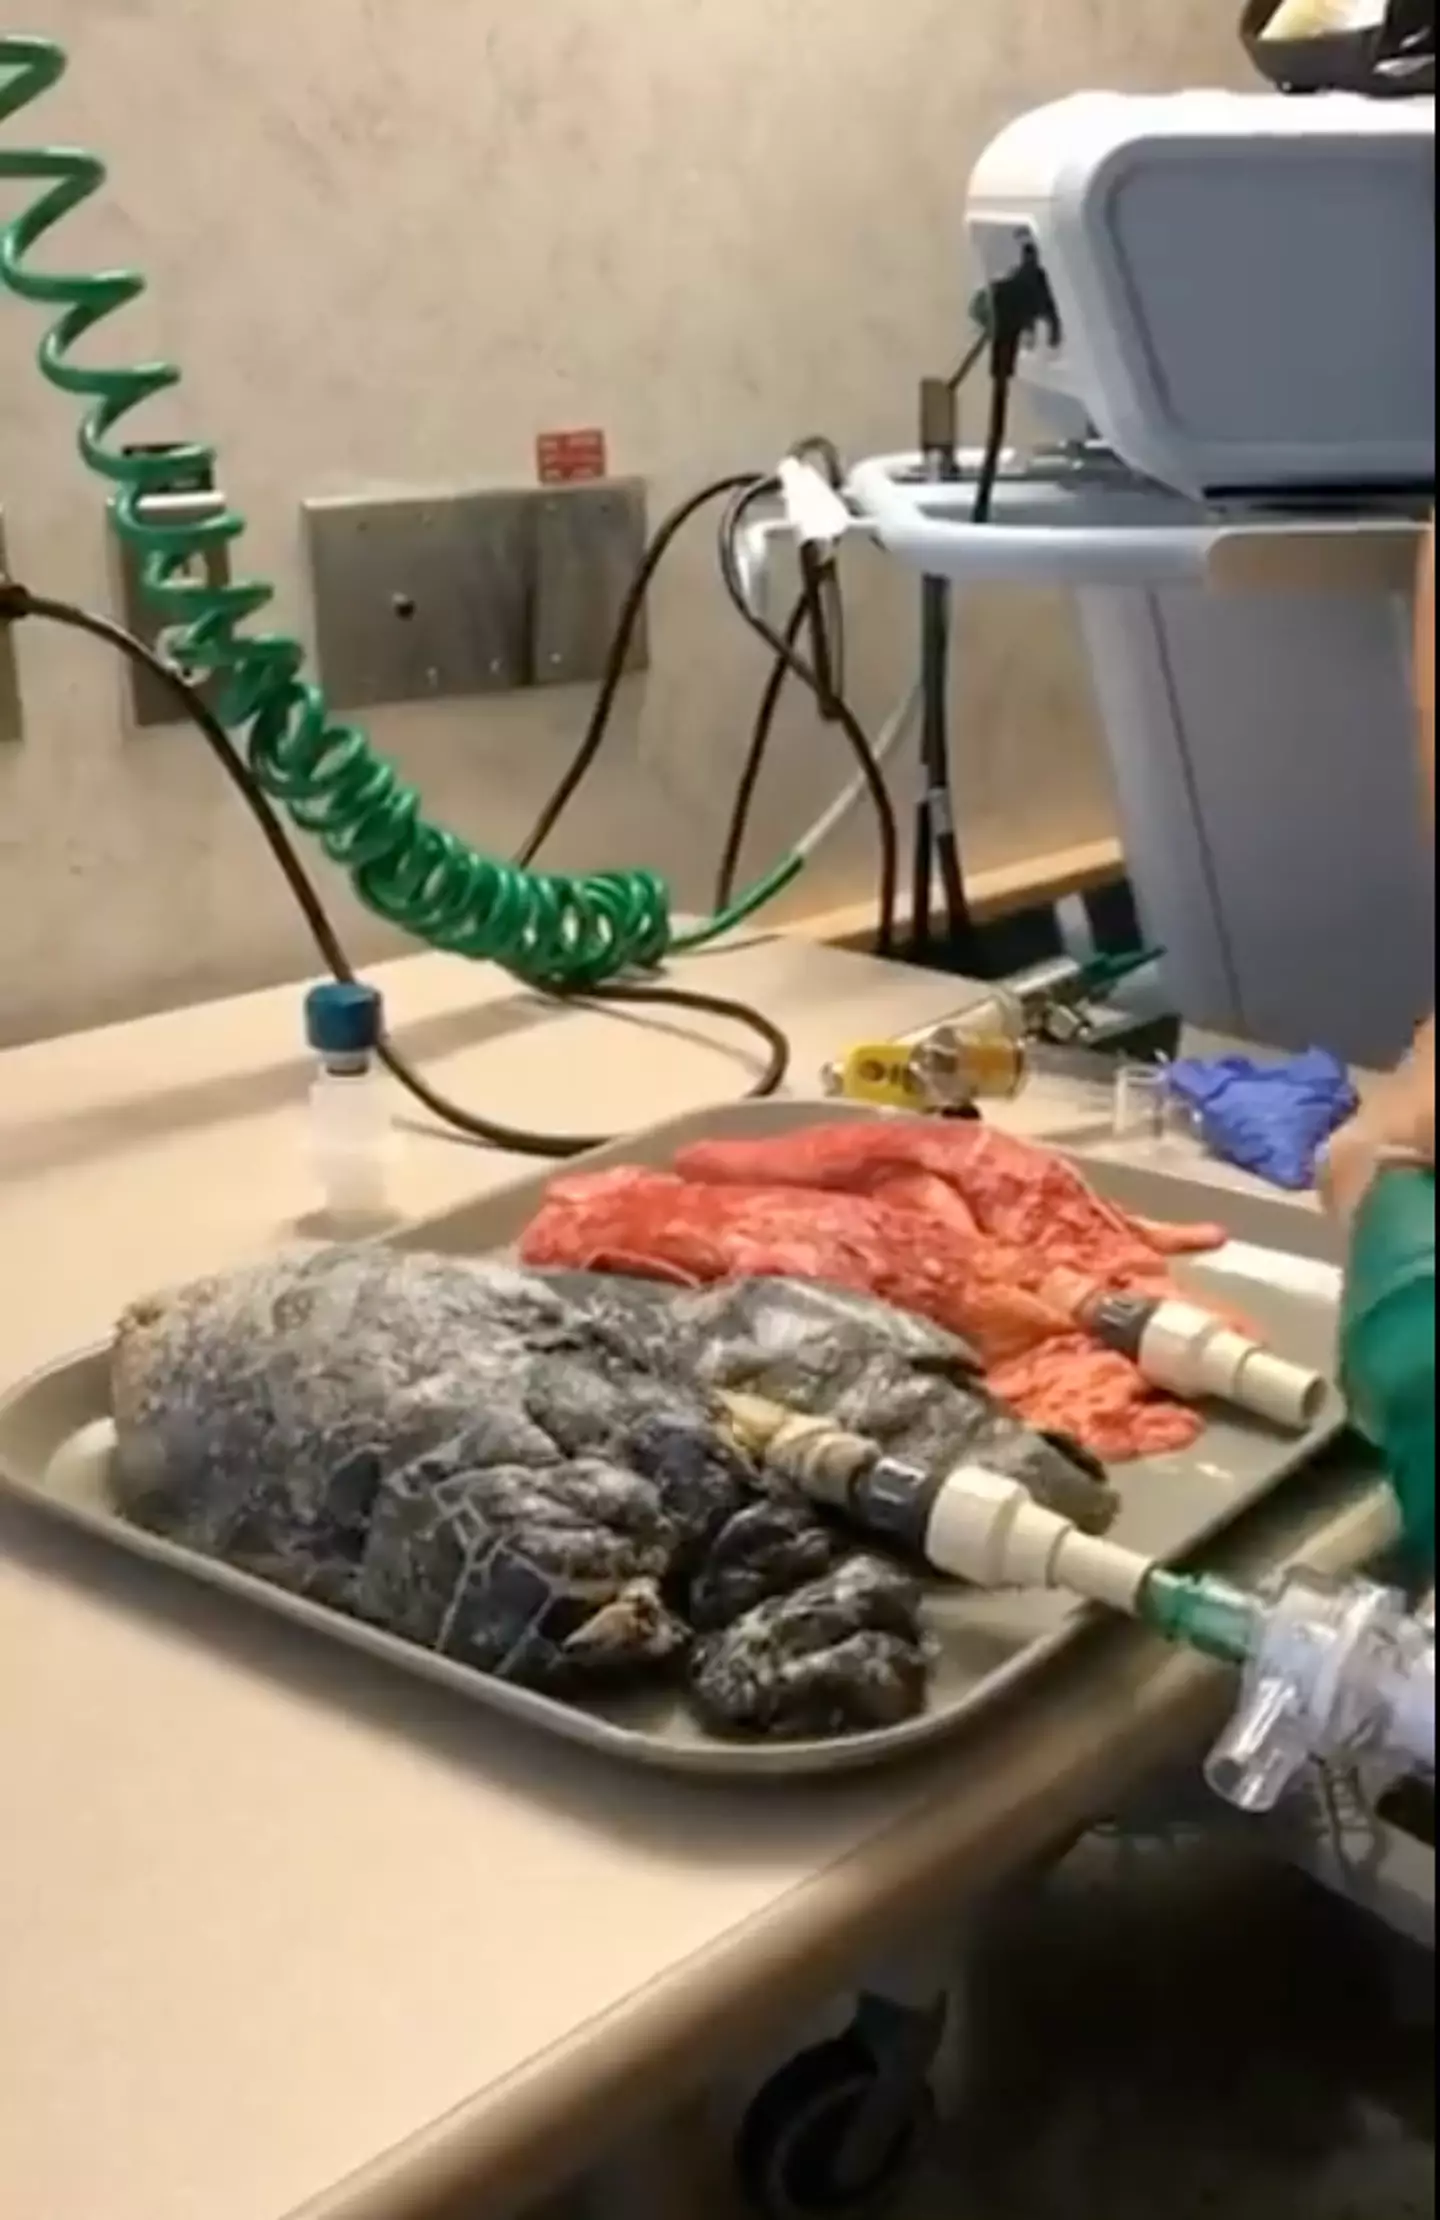 The grim video shows what the lungs of a 20-year-long smoker look like.